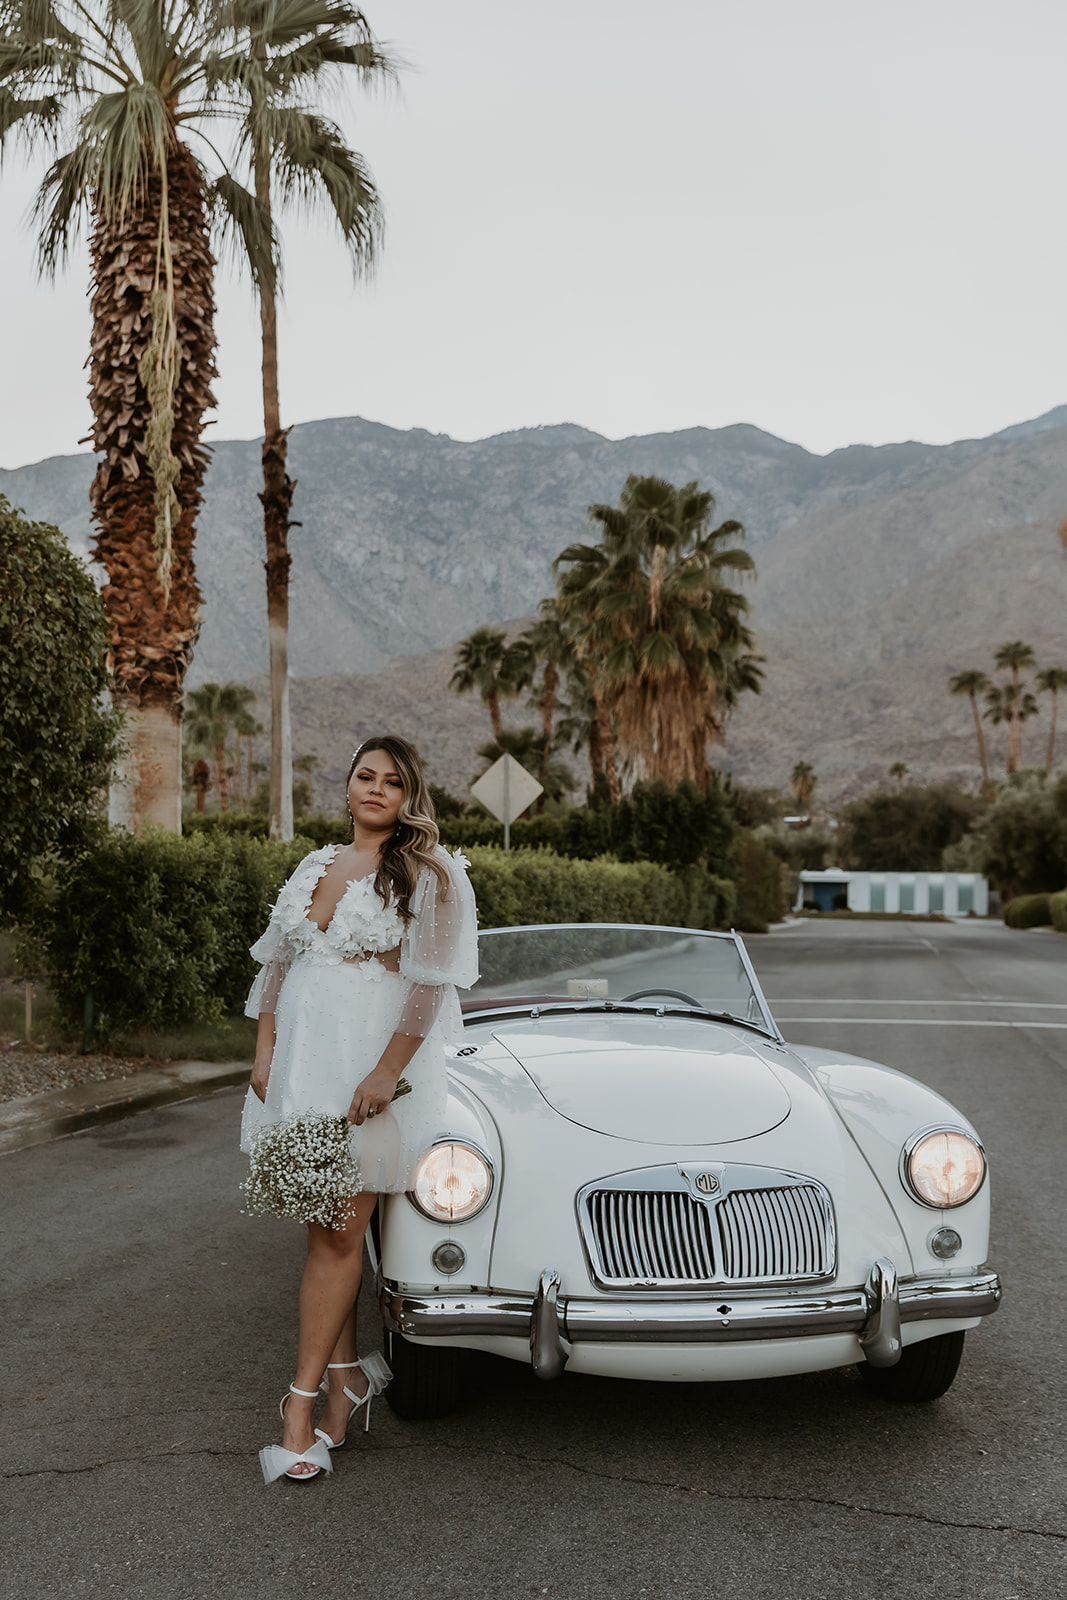 newly engaged women leaning on a classic car in palm springs during her engagement session with her fiance